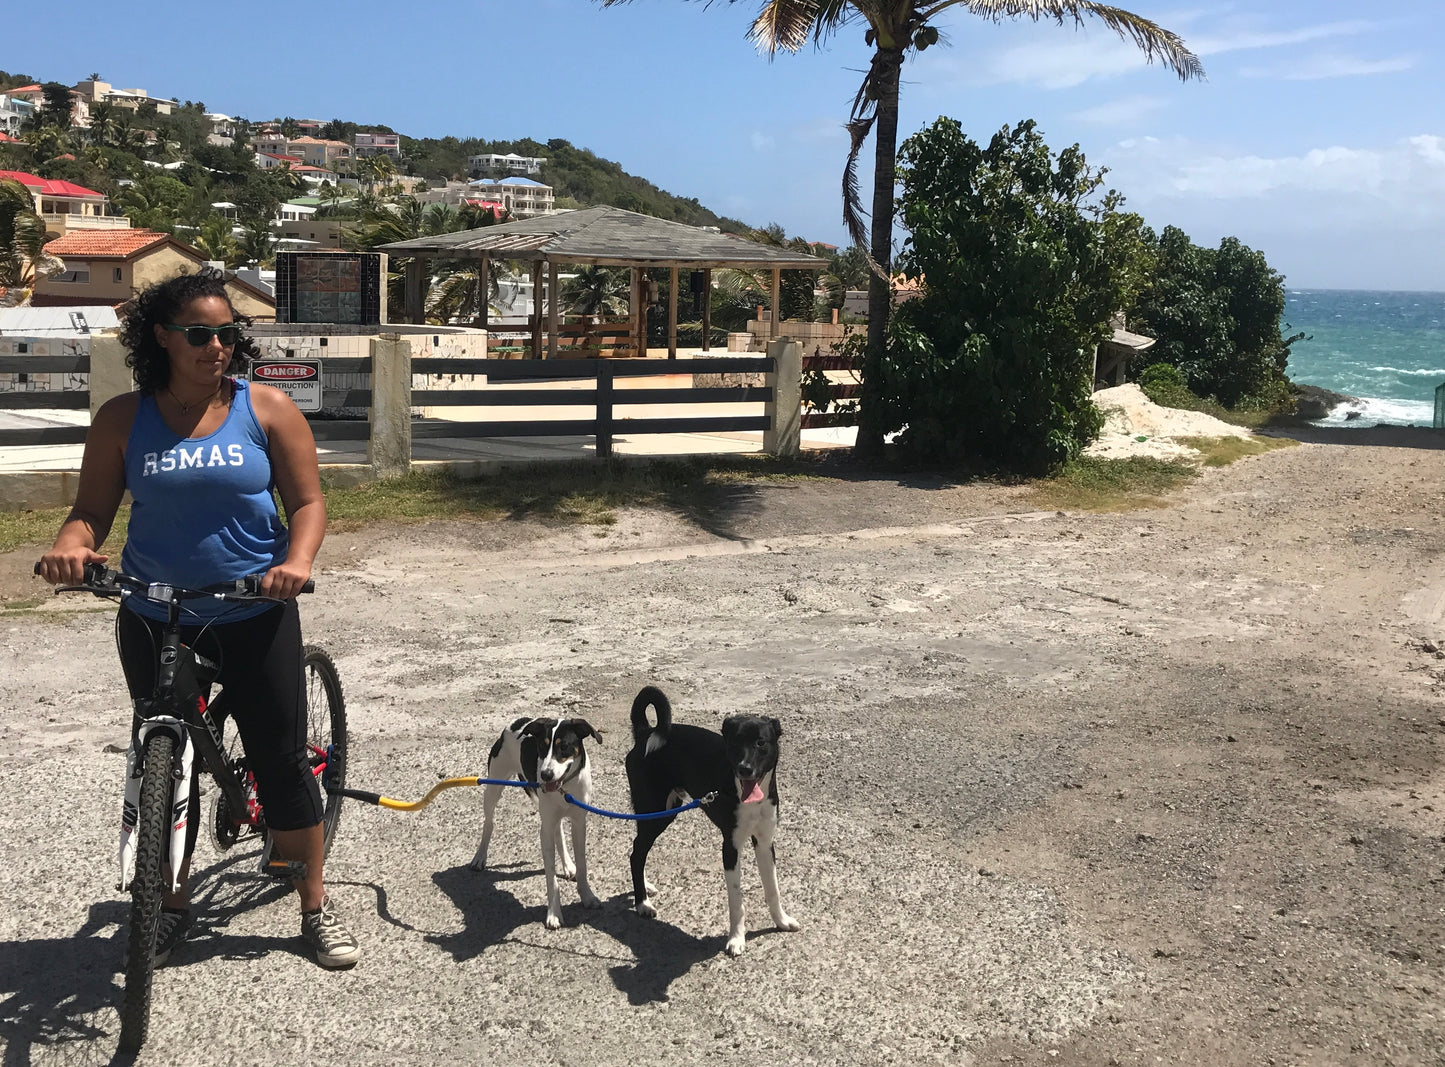 A rider with sunglasses straddles a red bike with a yellow Bike Tow Leash® attached. On the BTL is a small black spotted white dog and attached with the dog coupler a small Black and white dog with a curled tail. They all stand on a beach; in the background is a palm tree, the ocean, and buildings rising up the slope of the island.